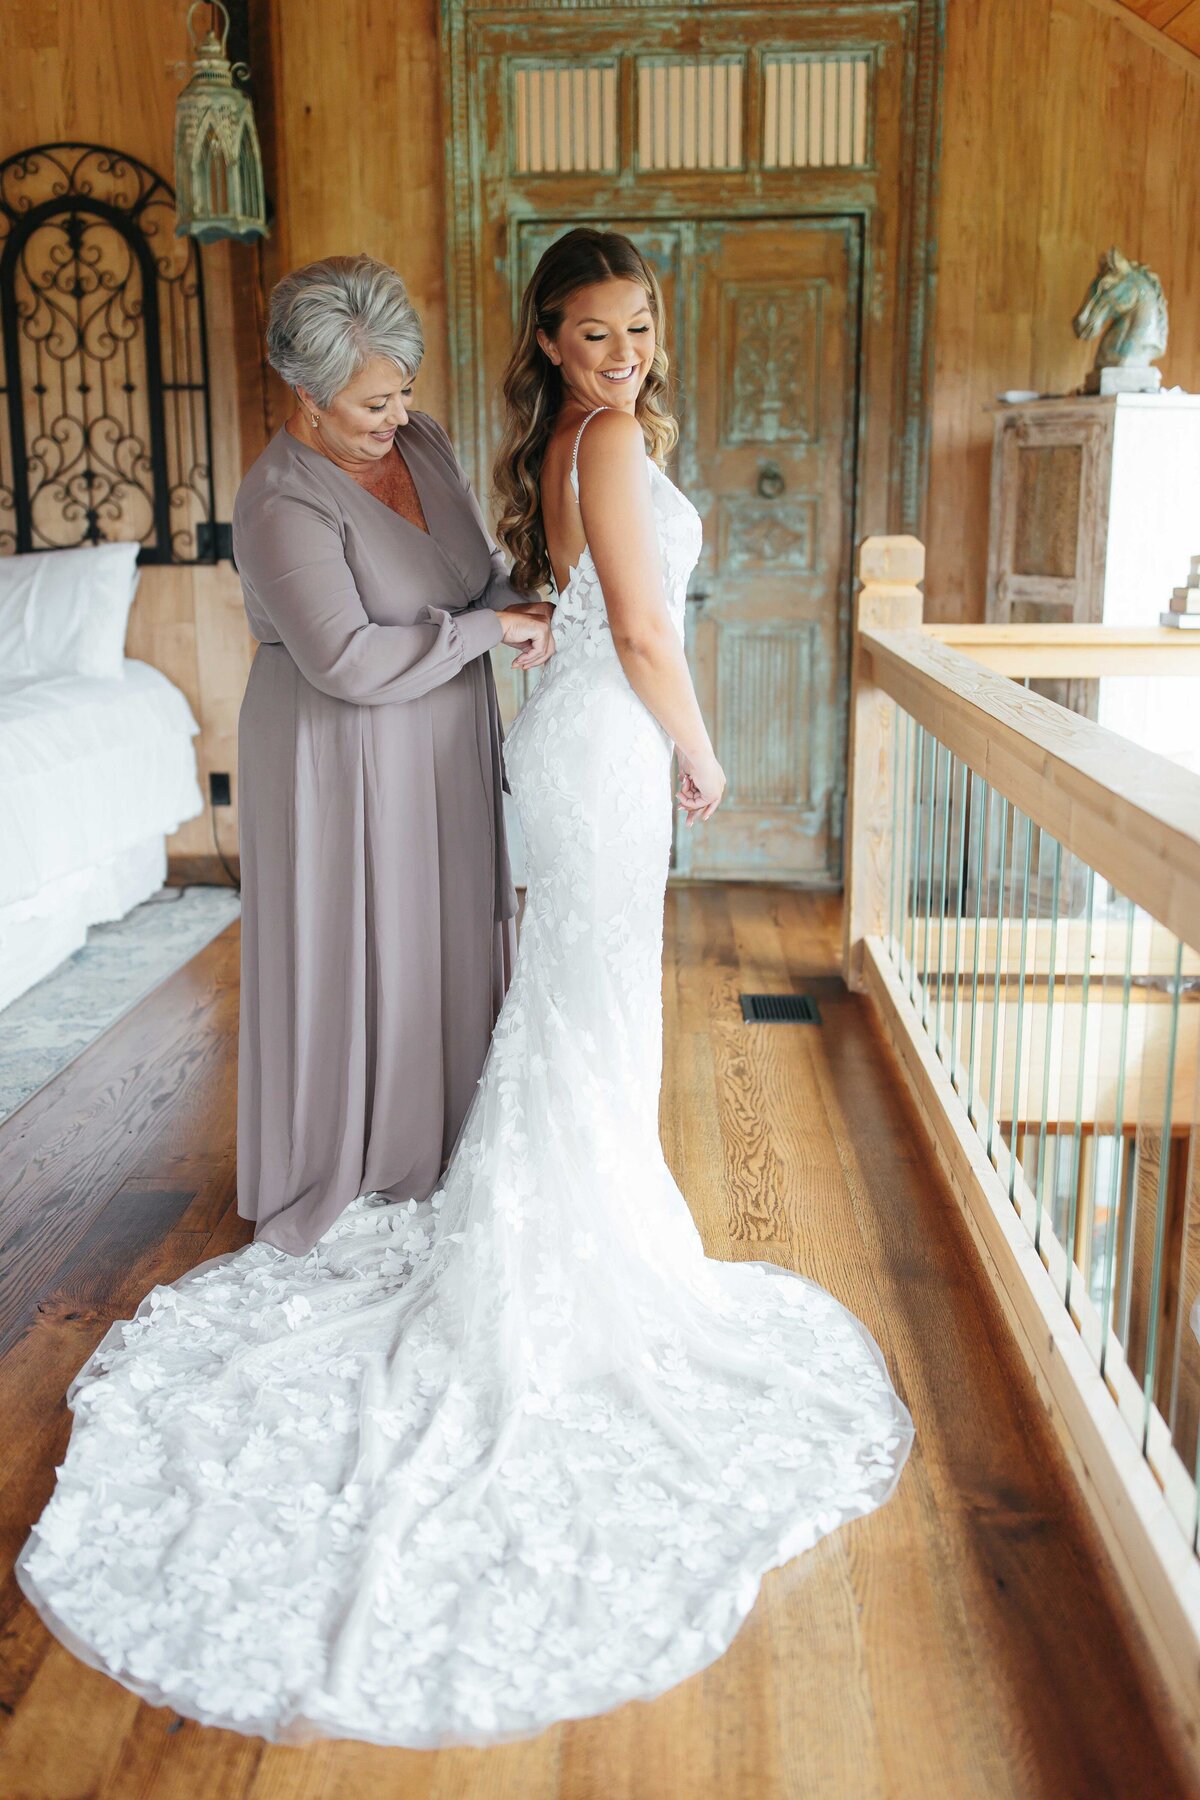 Mother helping bride dress with crooked river wedding photographer